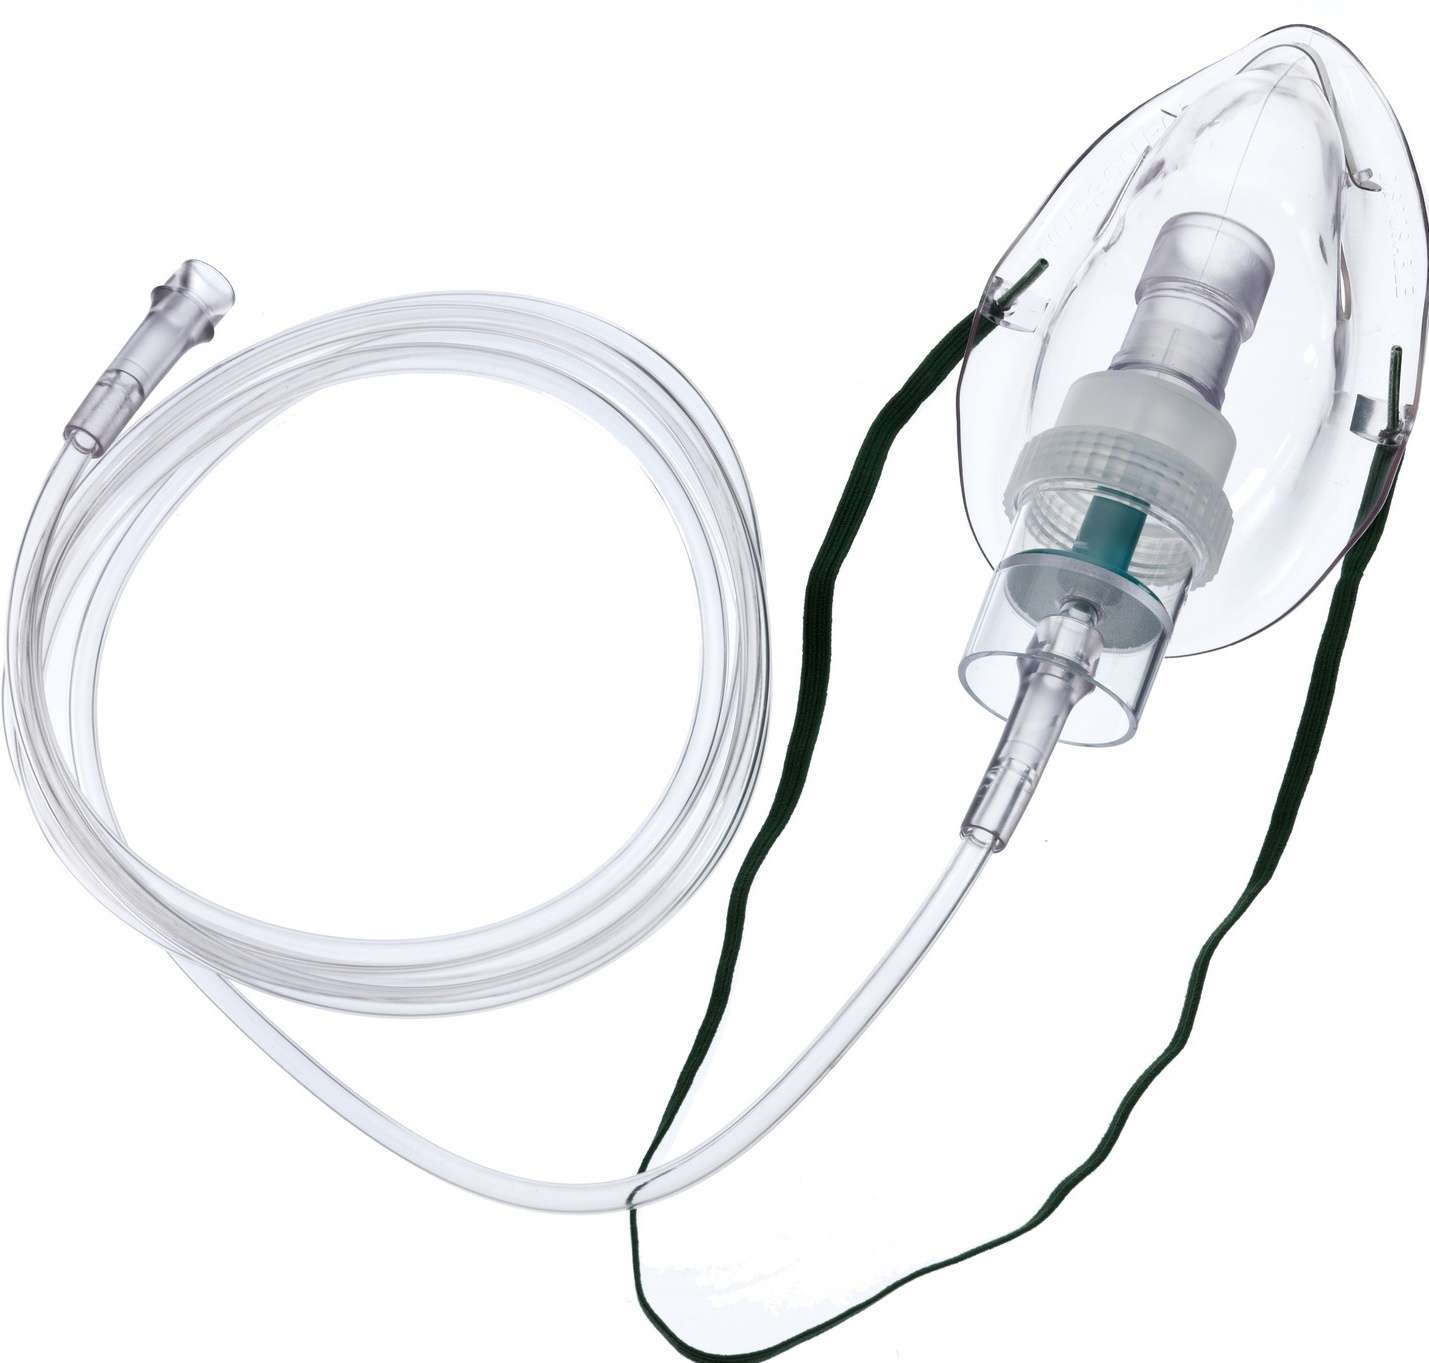 Hudson Micro Mist Nebuliser with 7ft tubing and Adult Mask image 0